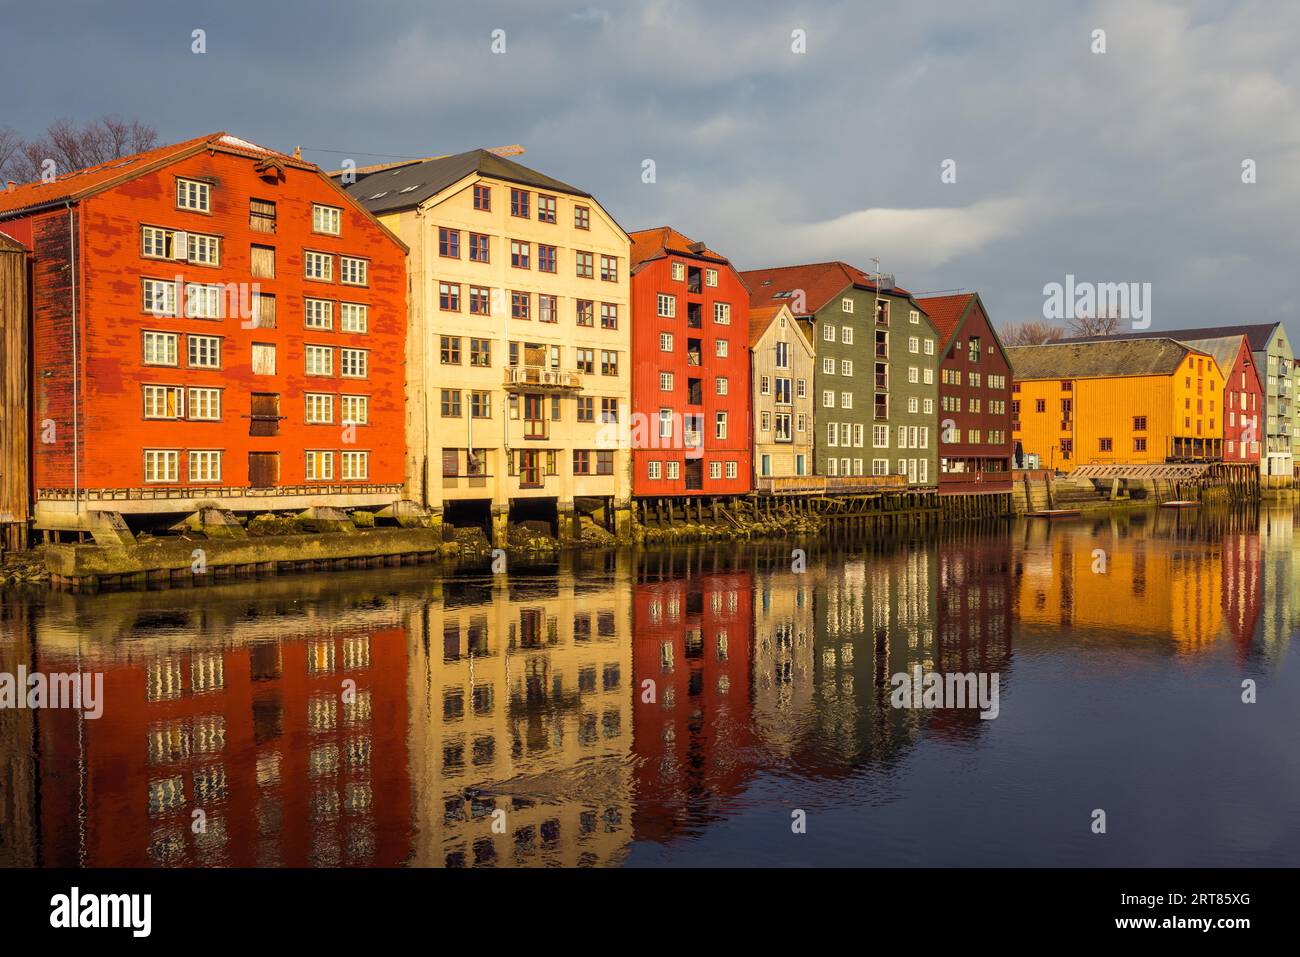 Old historic storehouses along the river Nidelva with colorful painted facades in Trondheim on beautiful winter day Stock Photo